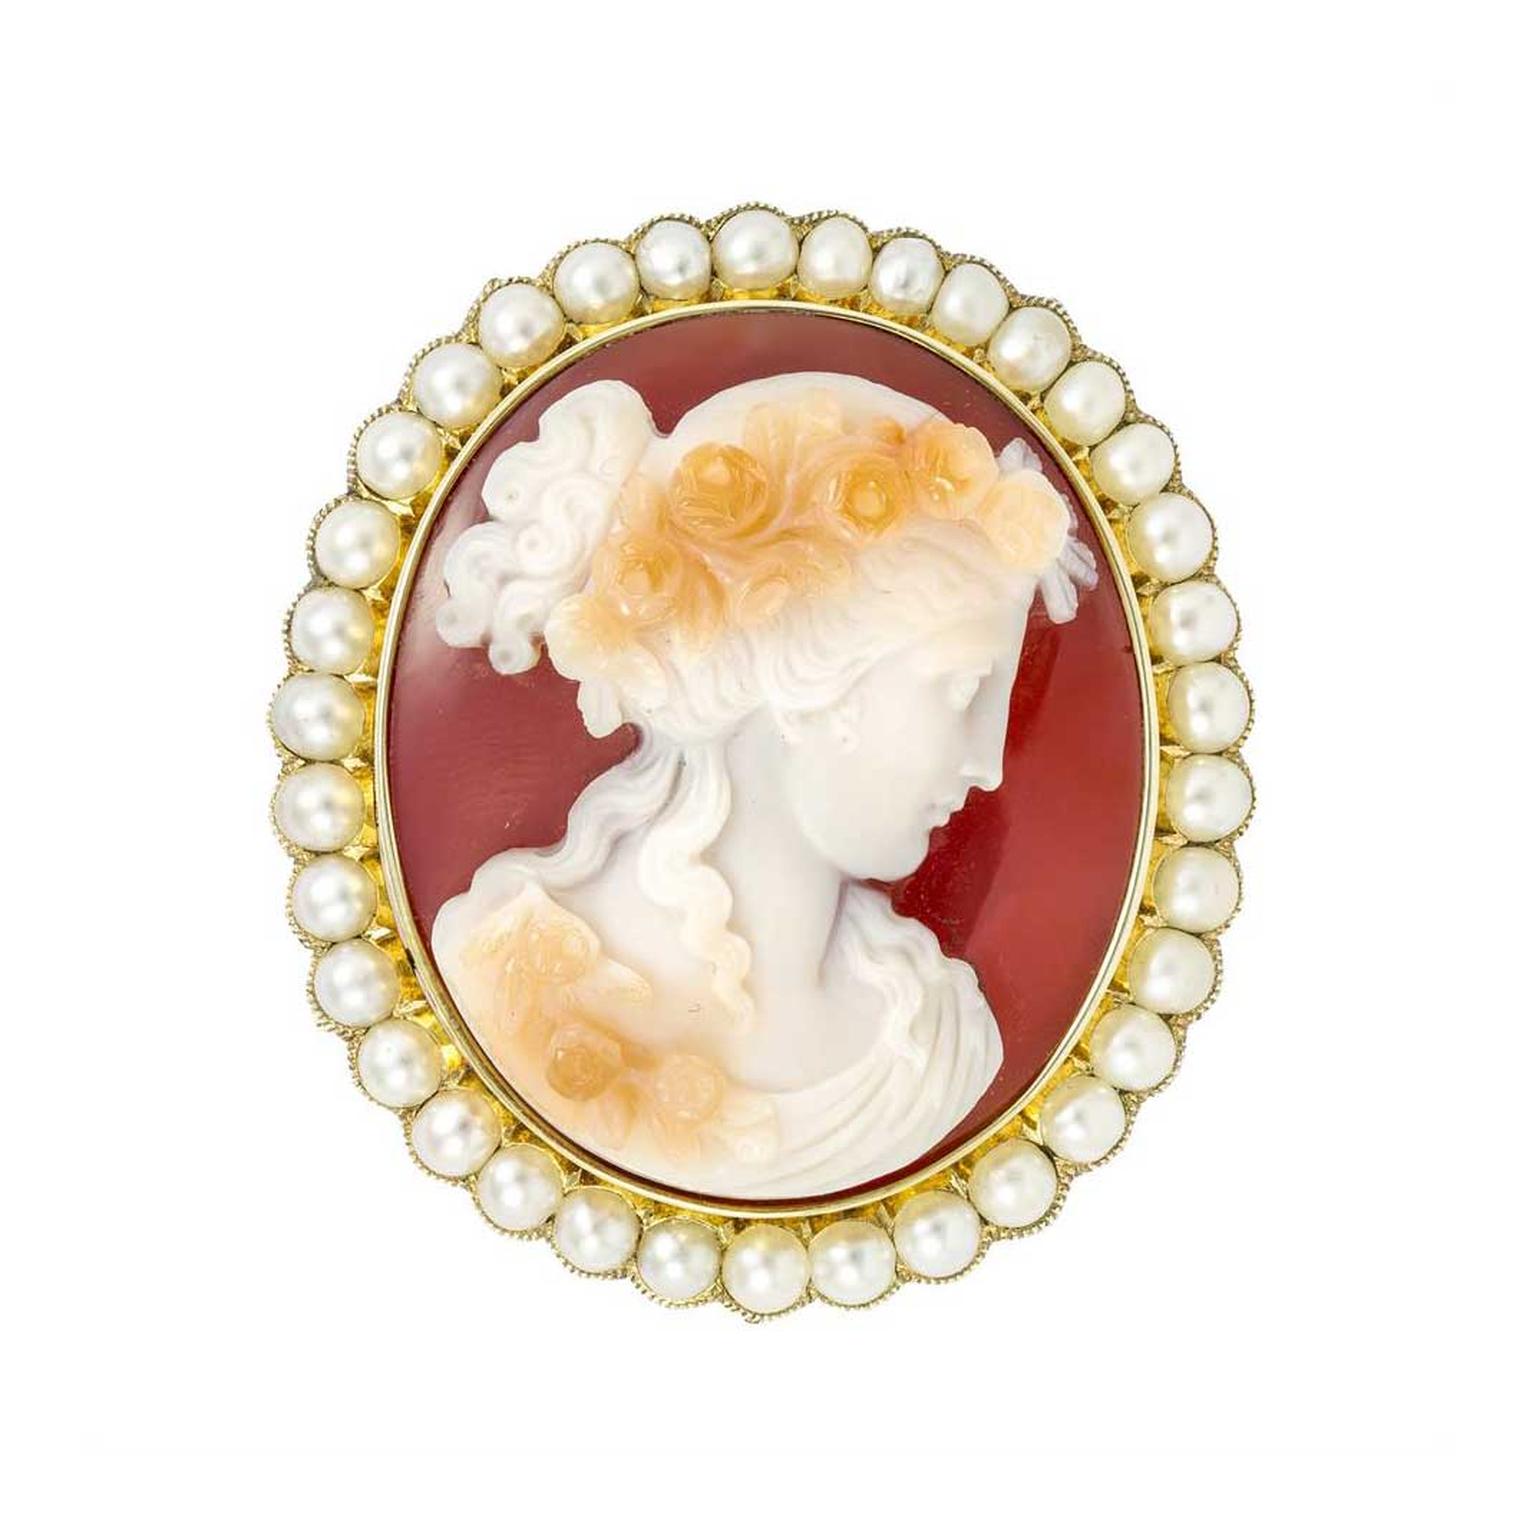 A history of brooches: the style 